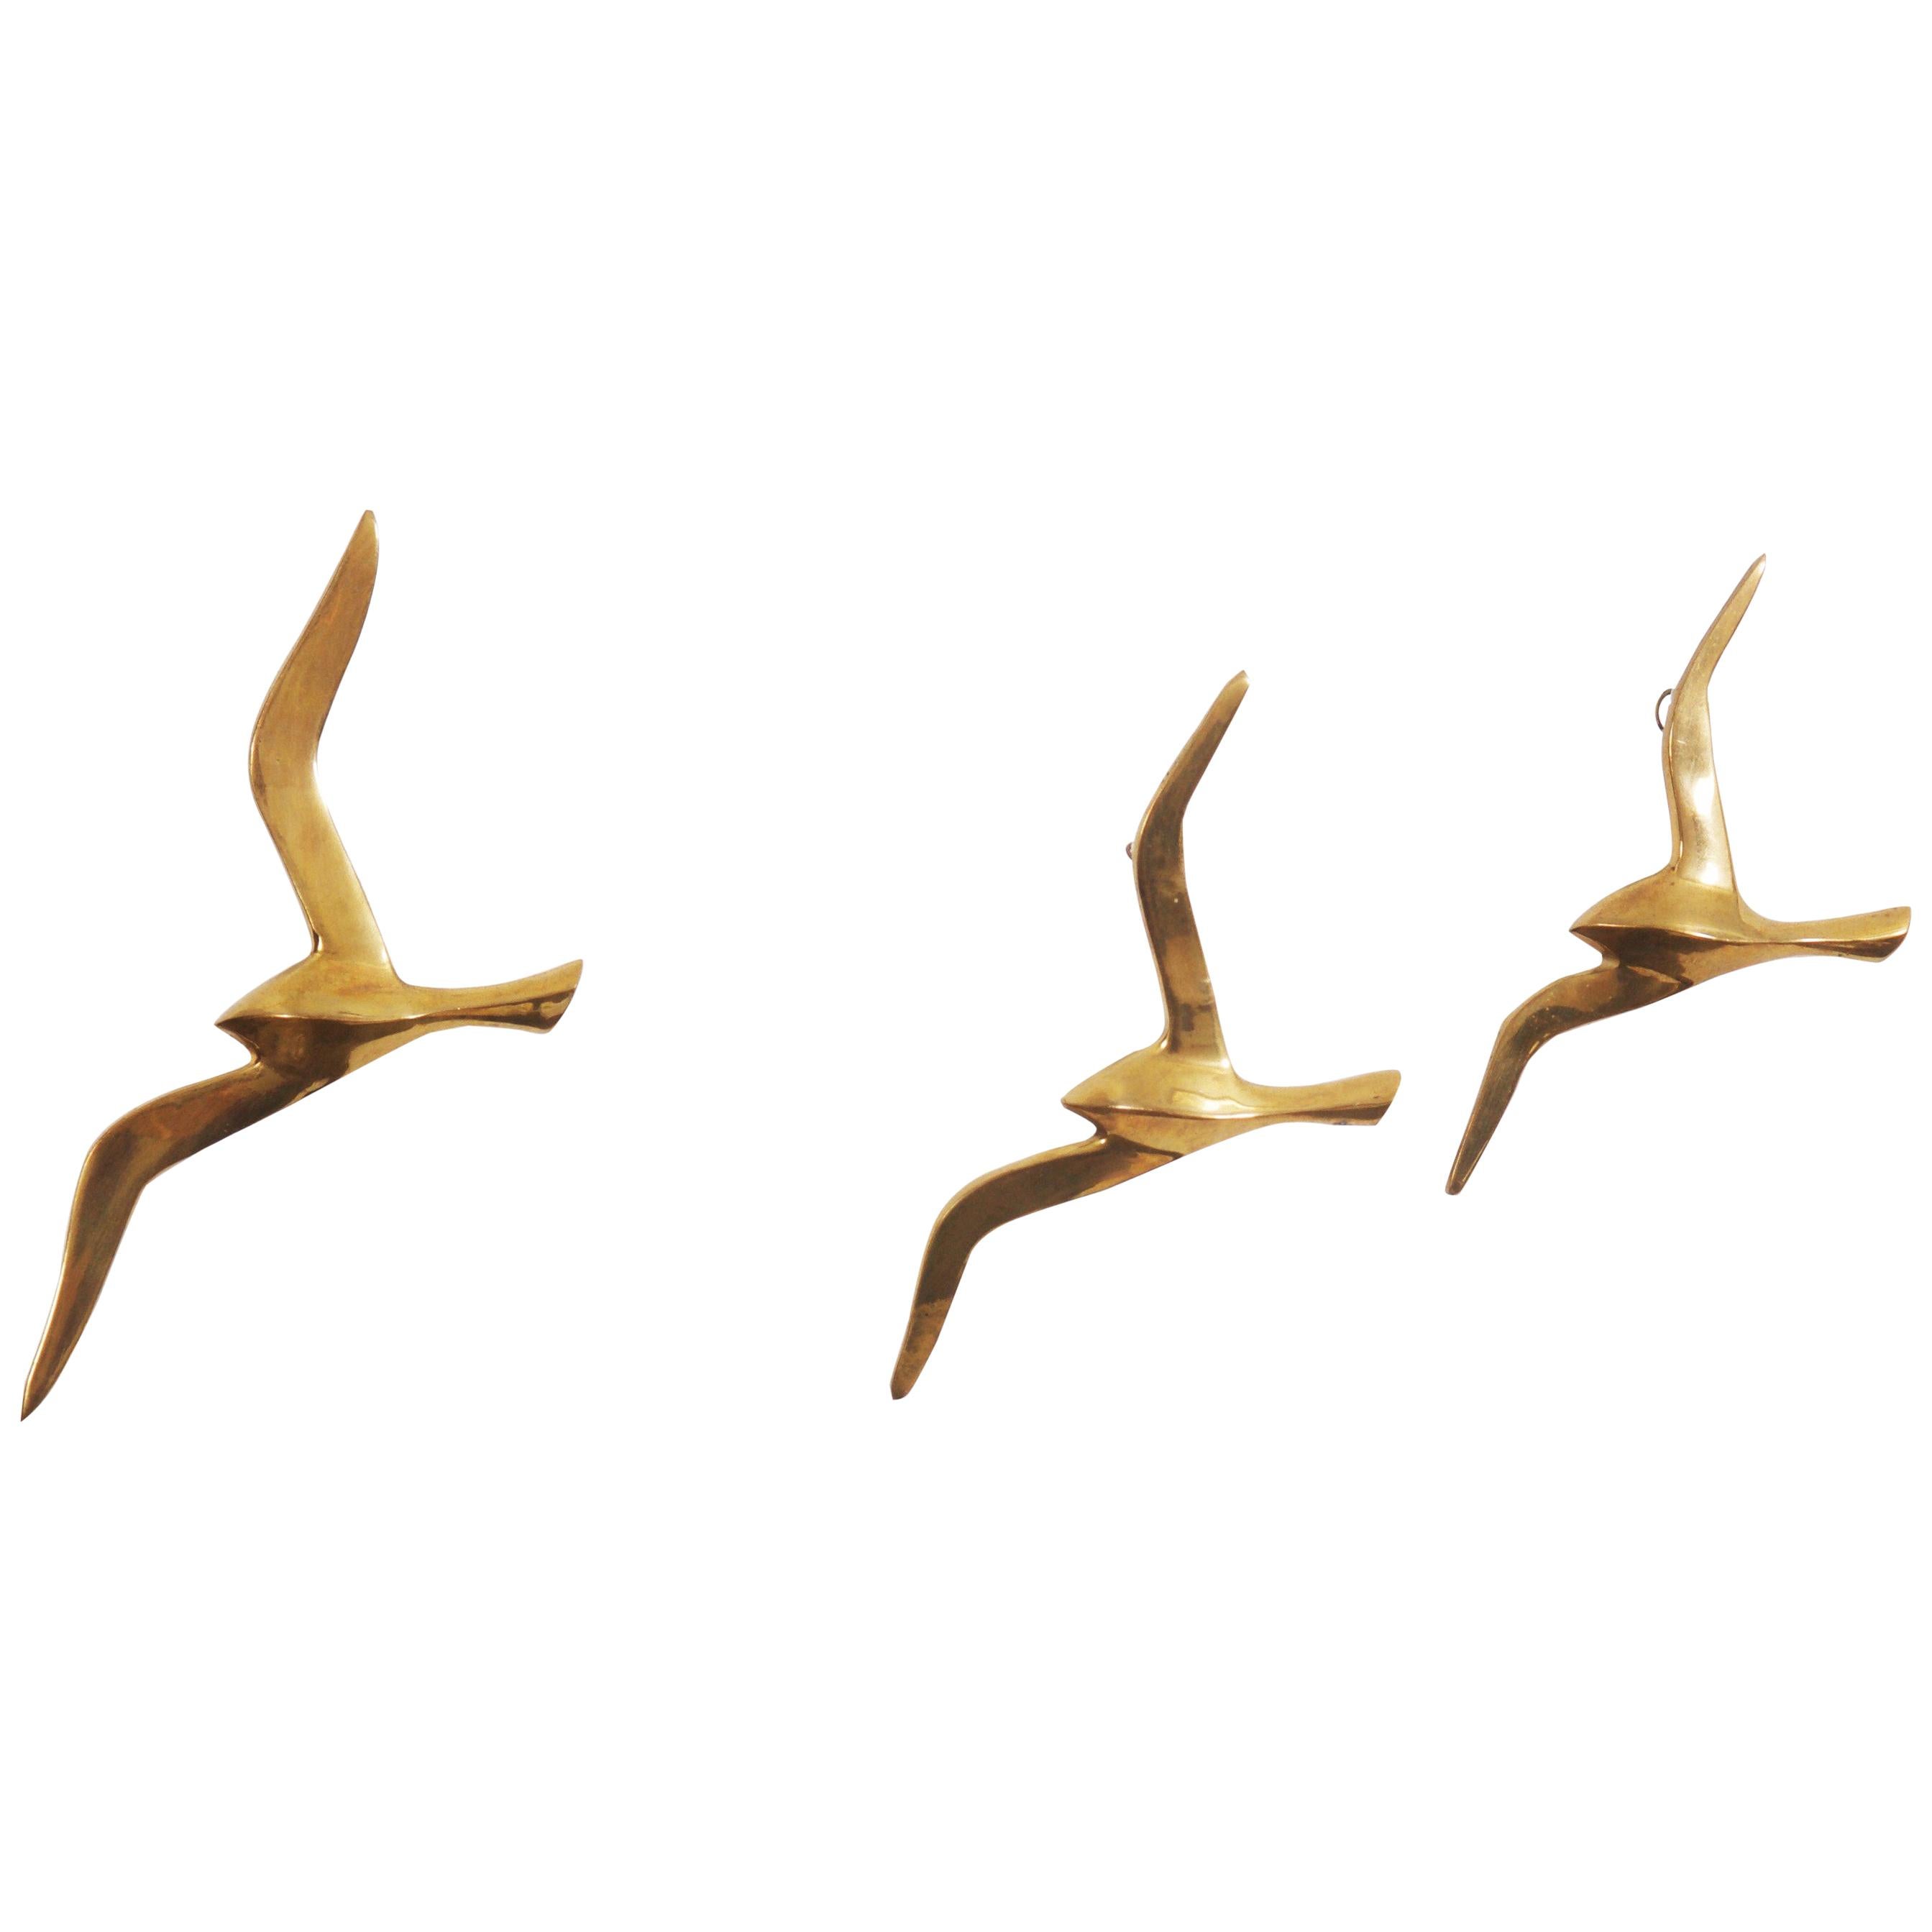 Midcentury Brass Seagull Wall Decor Sculptures For Sale